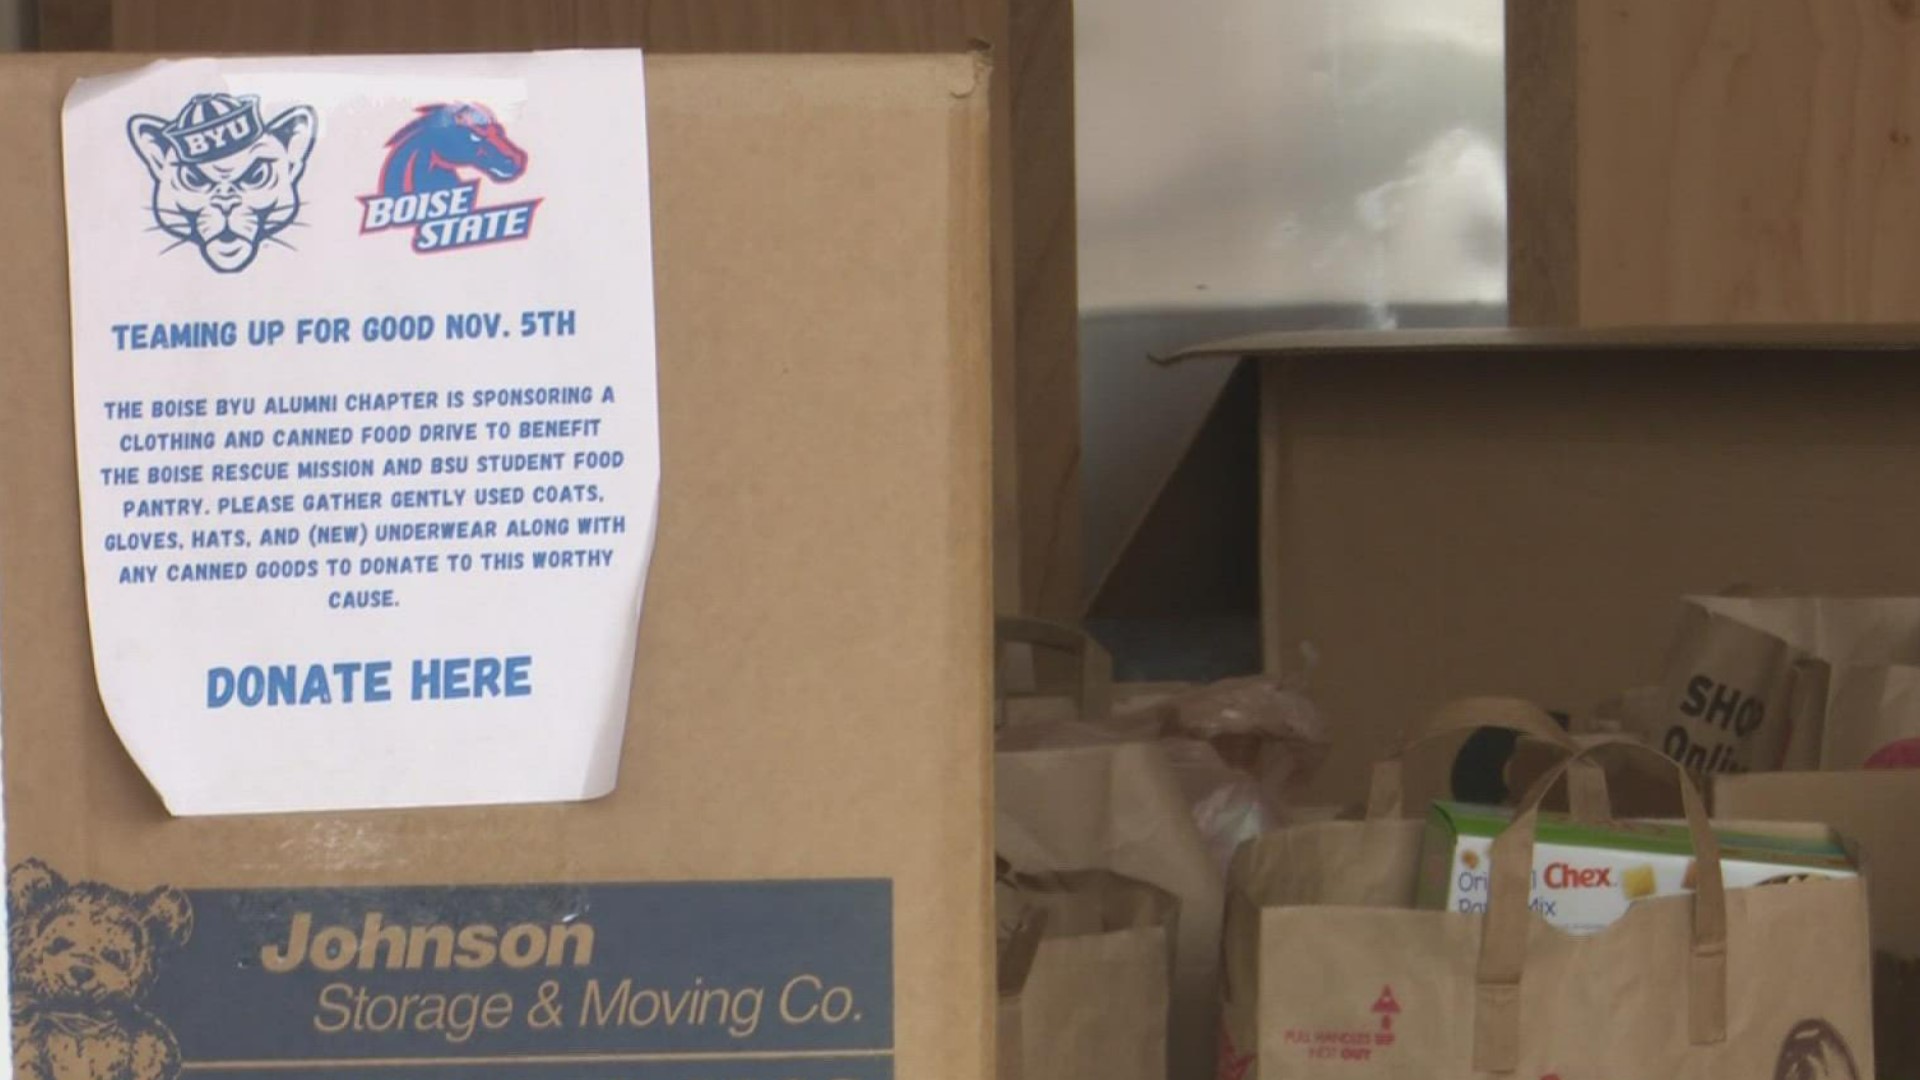 Fans from both teams were invited to bring donations for the Boise Rescue Mission and the Campus Food Pantry at Boise State University.